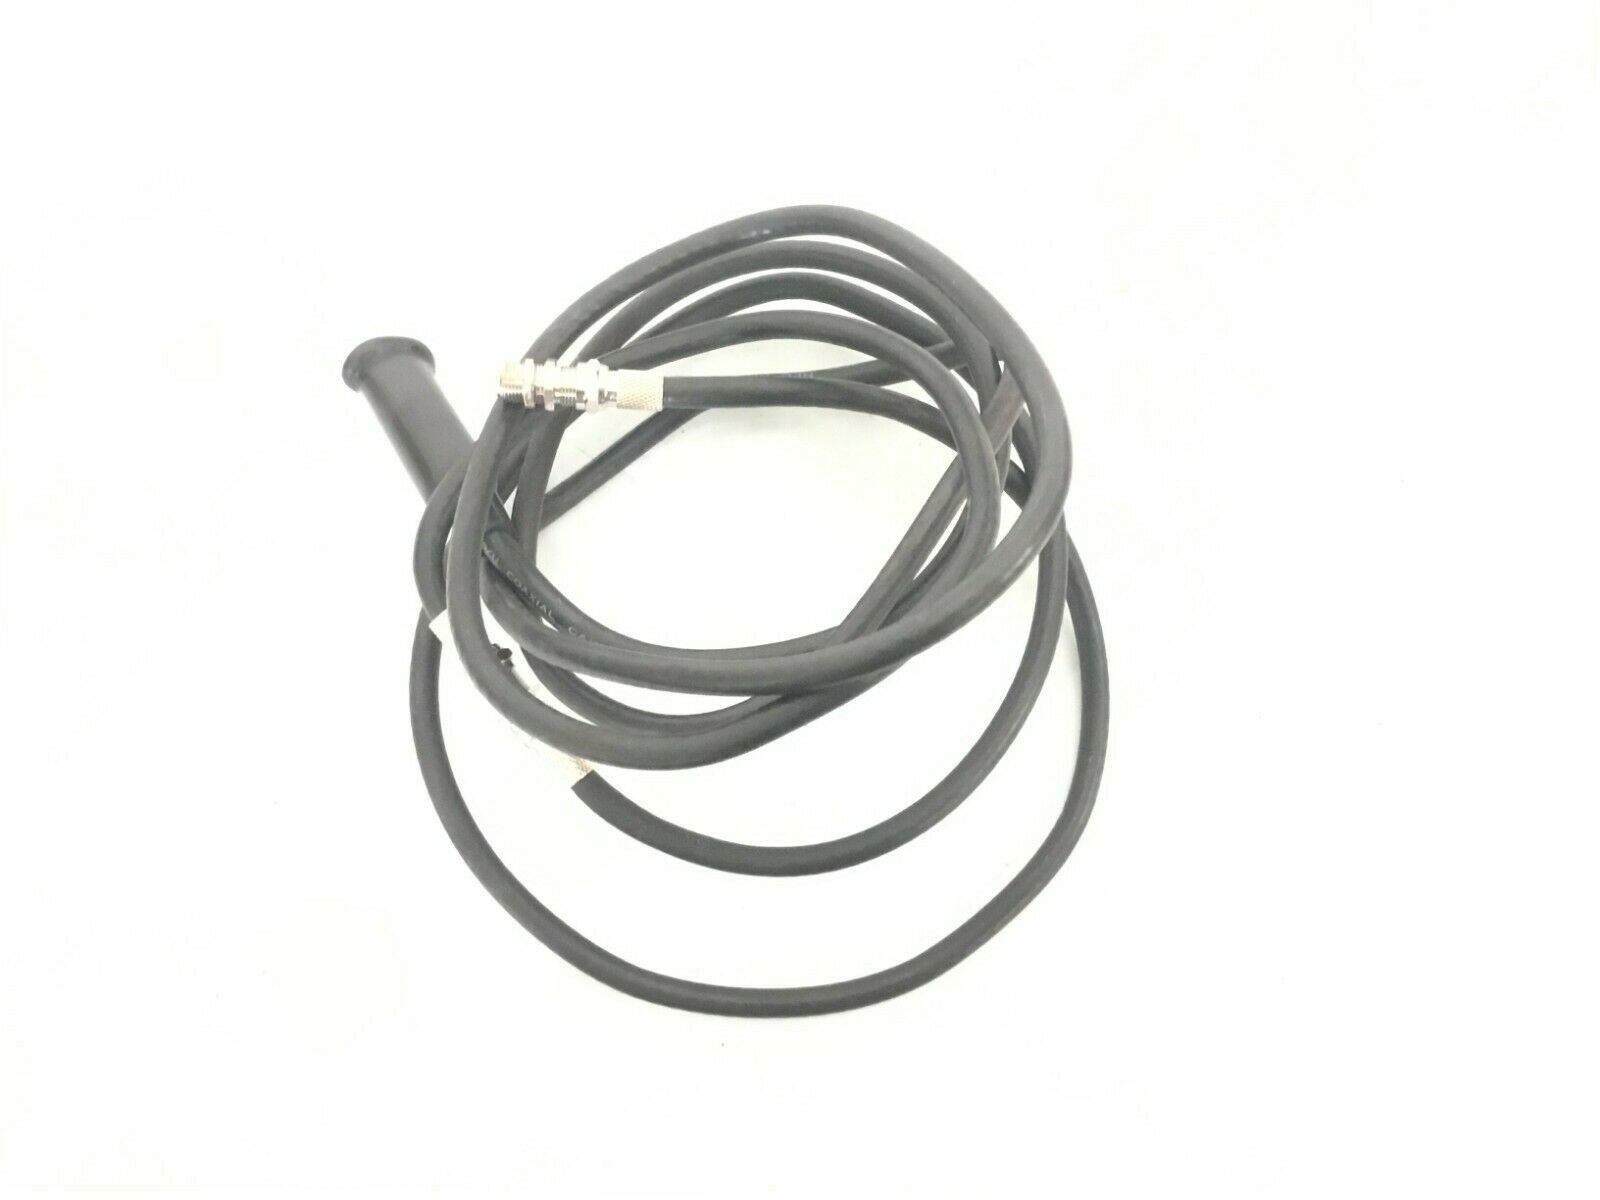 True Fitness XCS800 CS800 2010 Elliptical Coaxial Cable Extension Male to Female (Used)